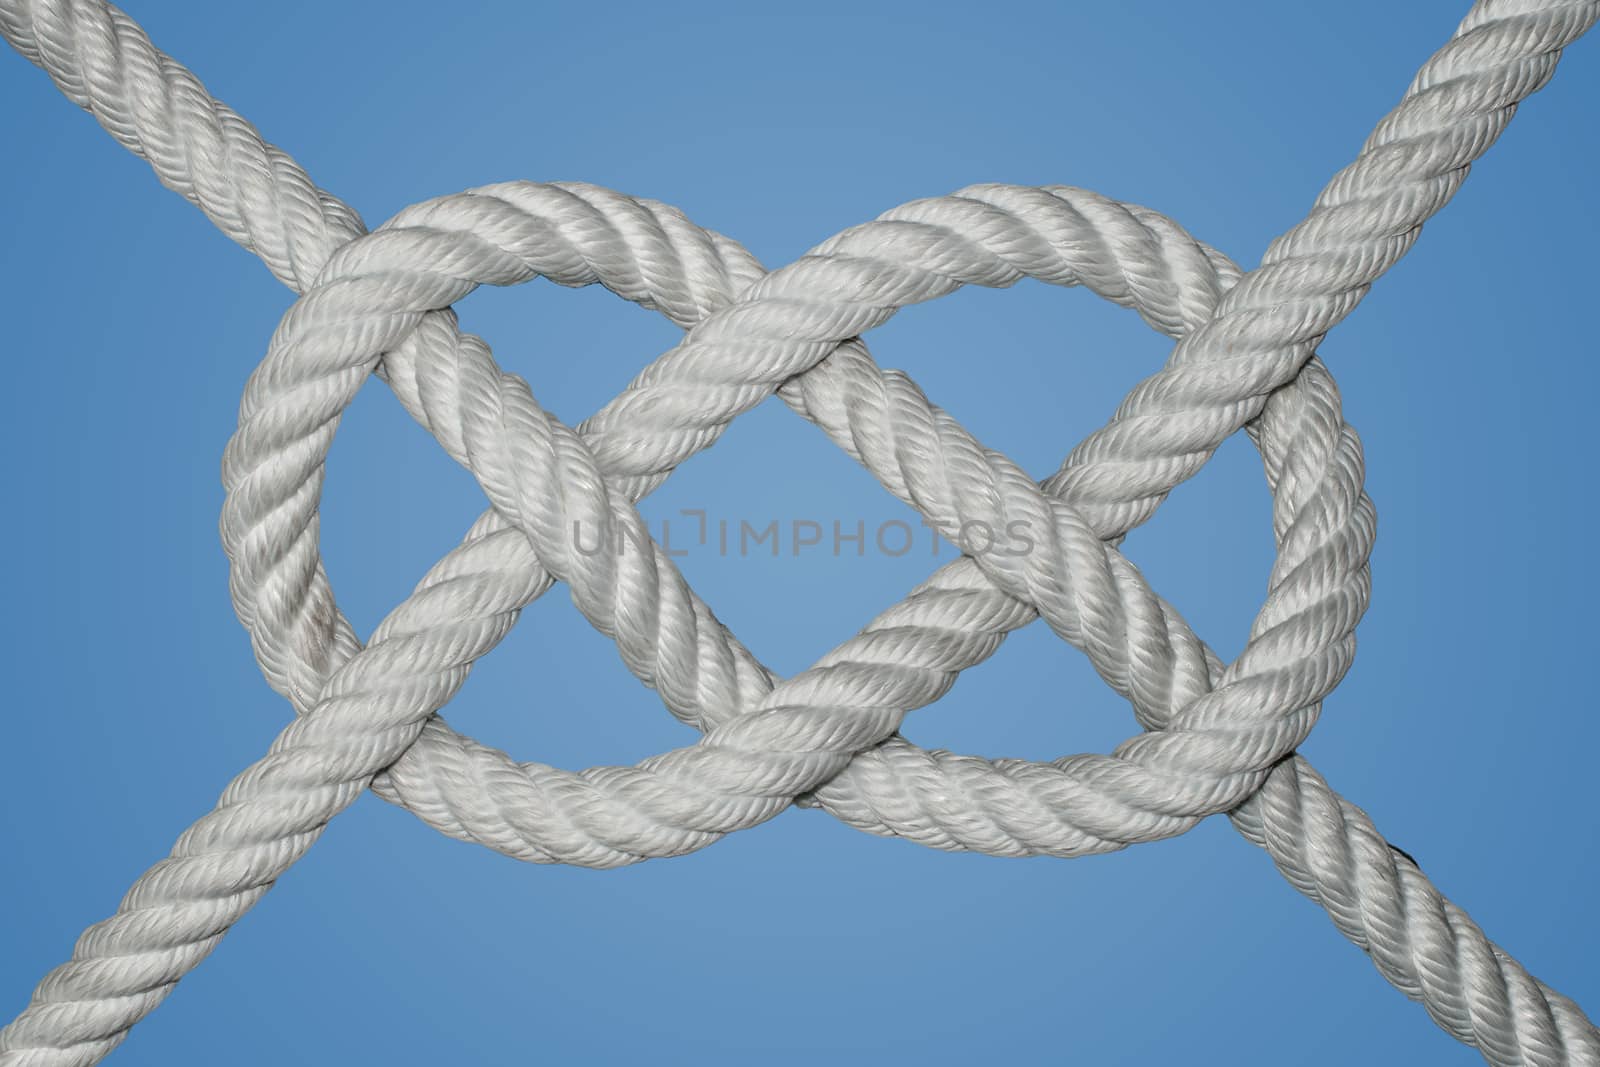 The carrick bend is a knot used for joining two lines. It is particularly appropriate for very heavy rope 